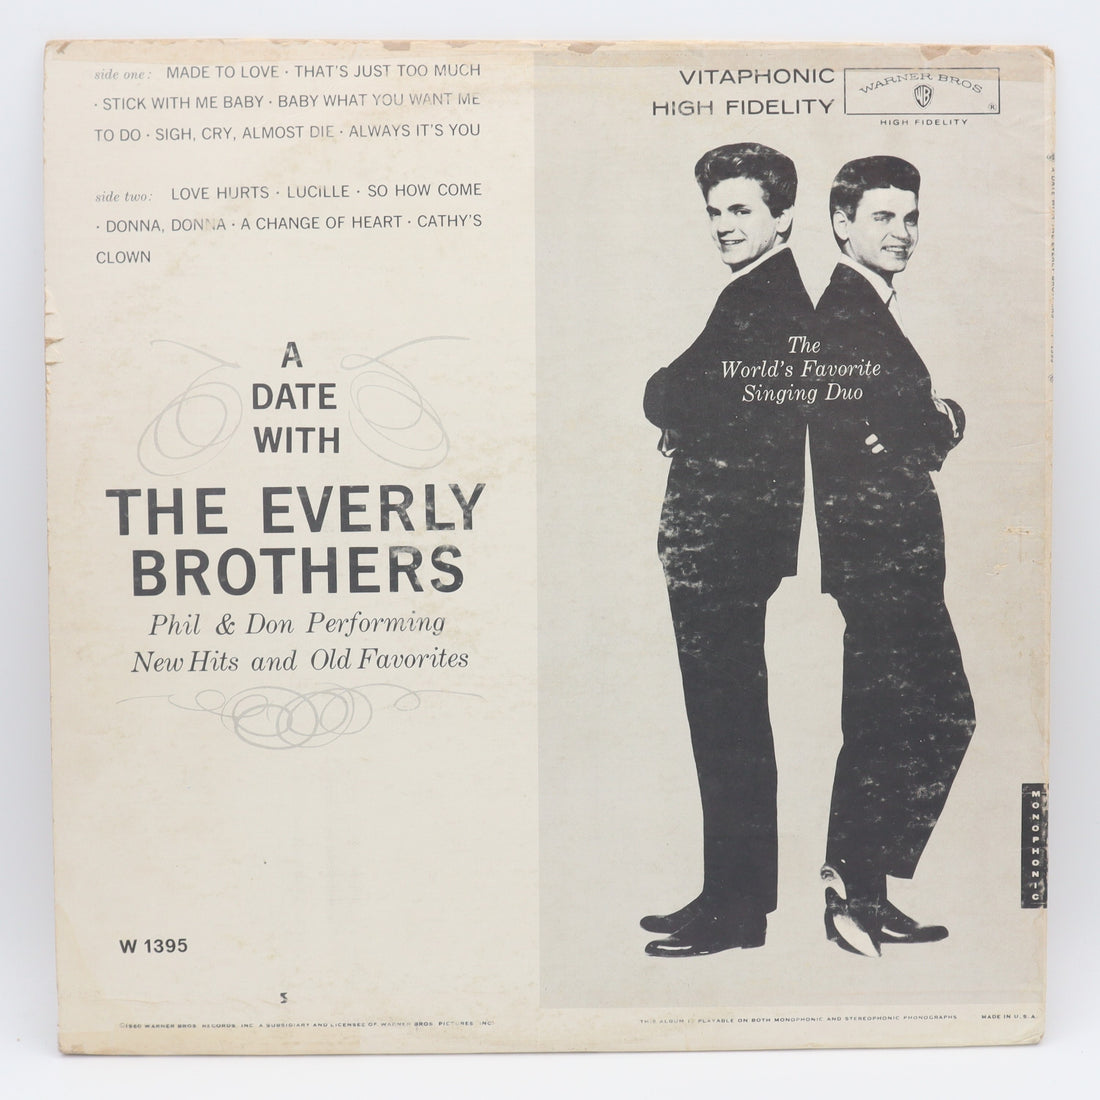 A Date With The Everly Brothers